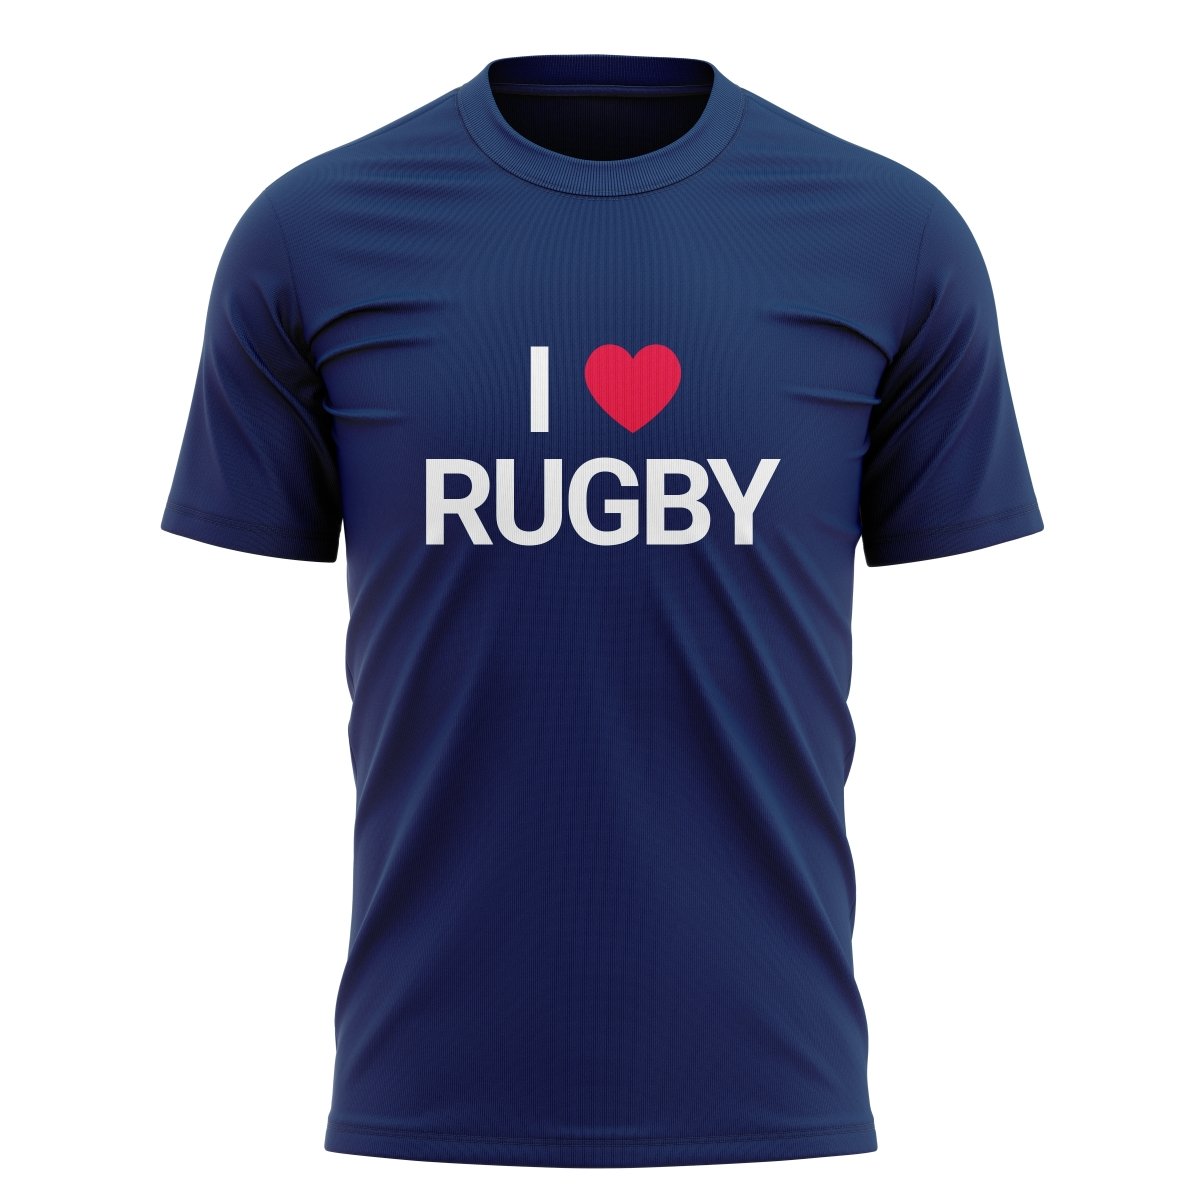 I Love Rugby Graphic Tee - www.therugbyshop.com www.therugbyshop.com MEN&#39;S / NAVY / S SANMAR TEES I Love Rugby Graphic Tee